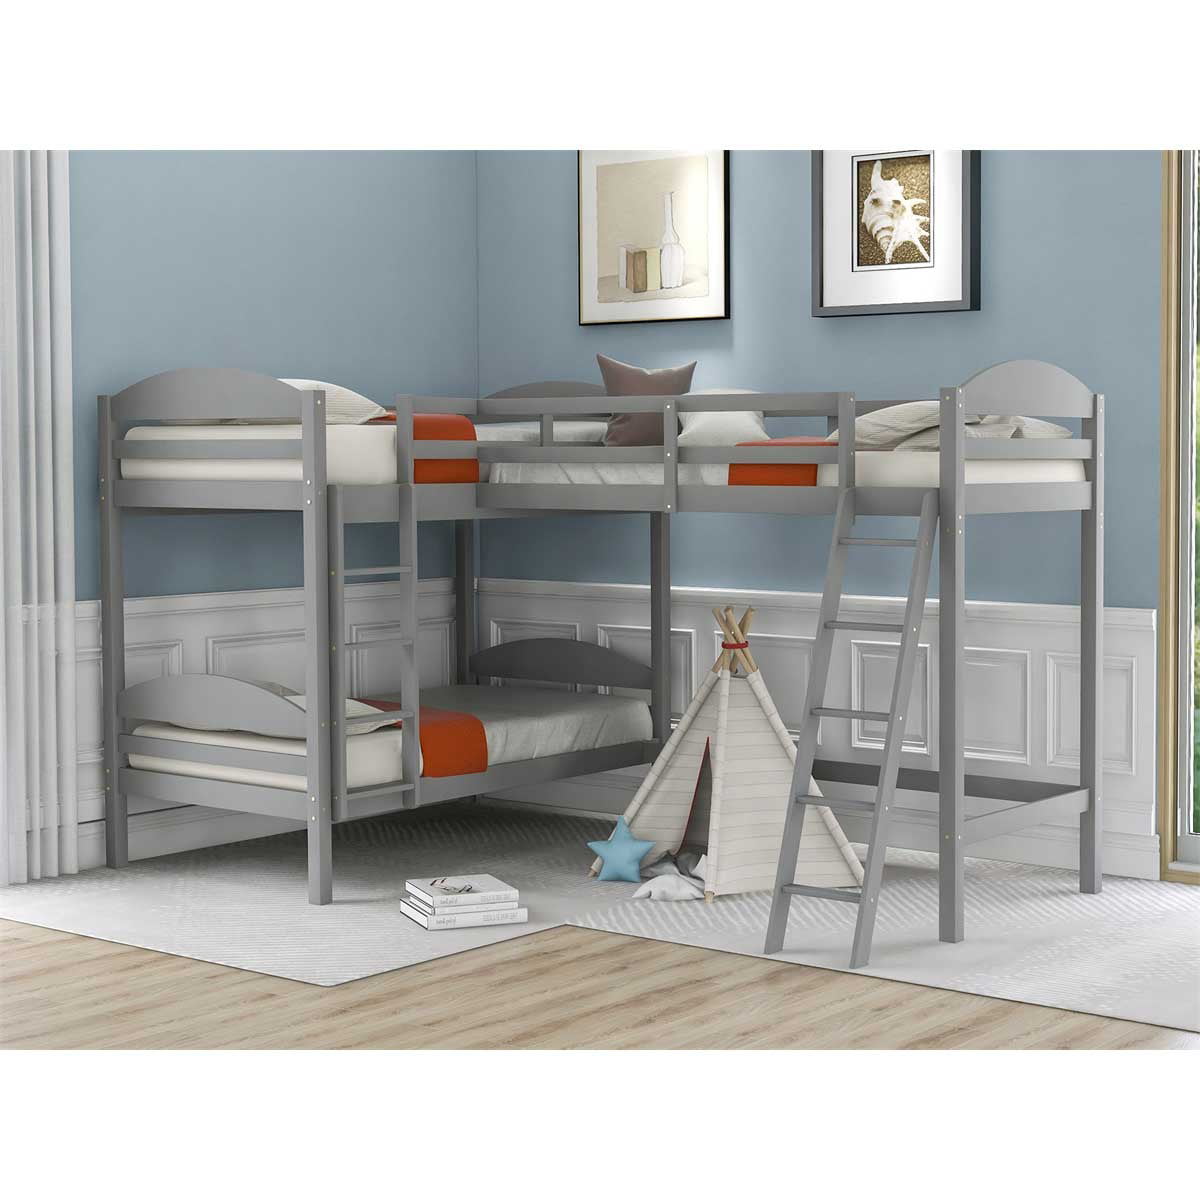 Triple Bunk Bed Wooden Loft, Bunk Bed With Loft Style